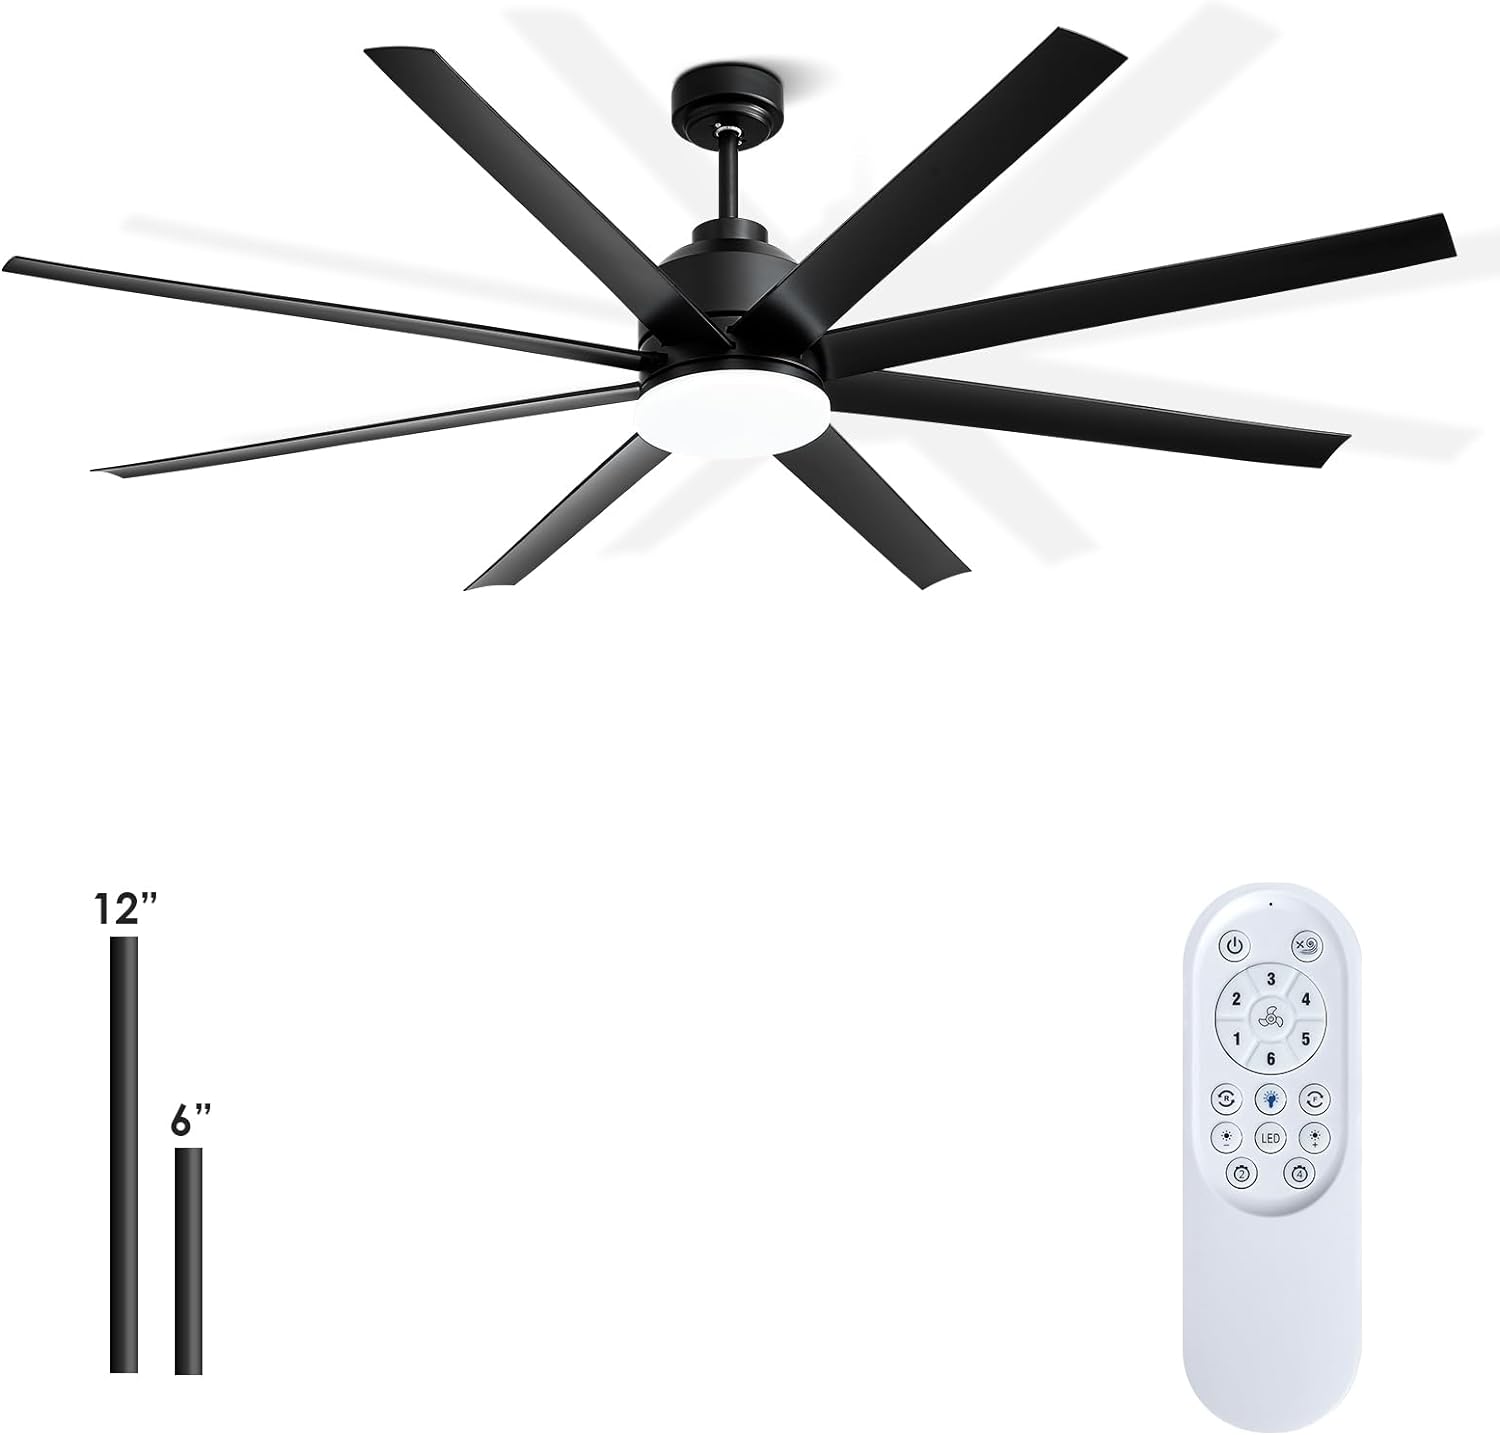 Act Fast! Exclusive Offers for You - Kayleik 72 Inch Industrial Ceiling Fan - Black Big Ceiling Fan with Light - Save Big on Your Purchase - Limited Stock